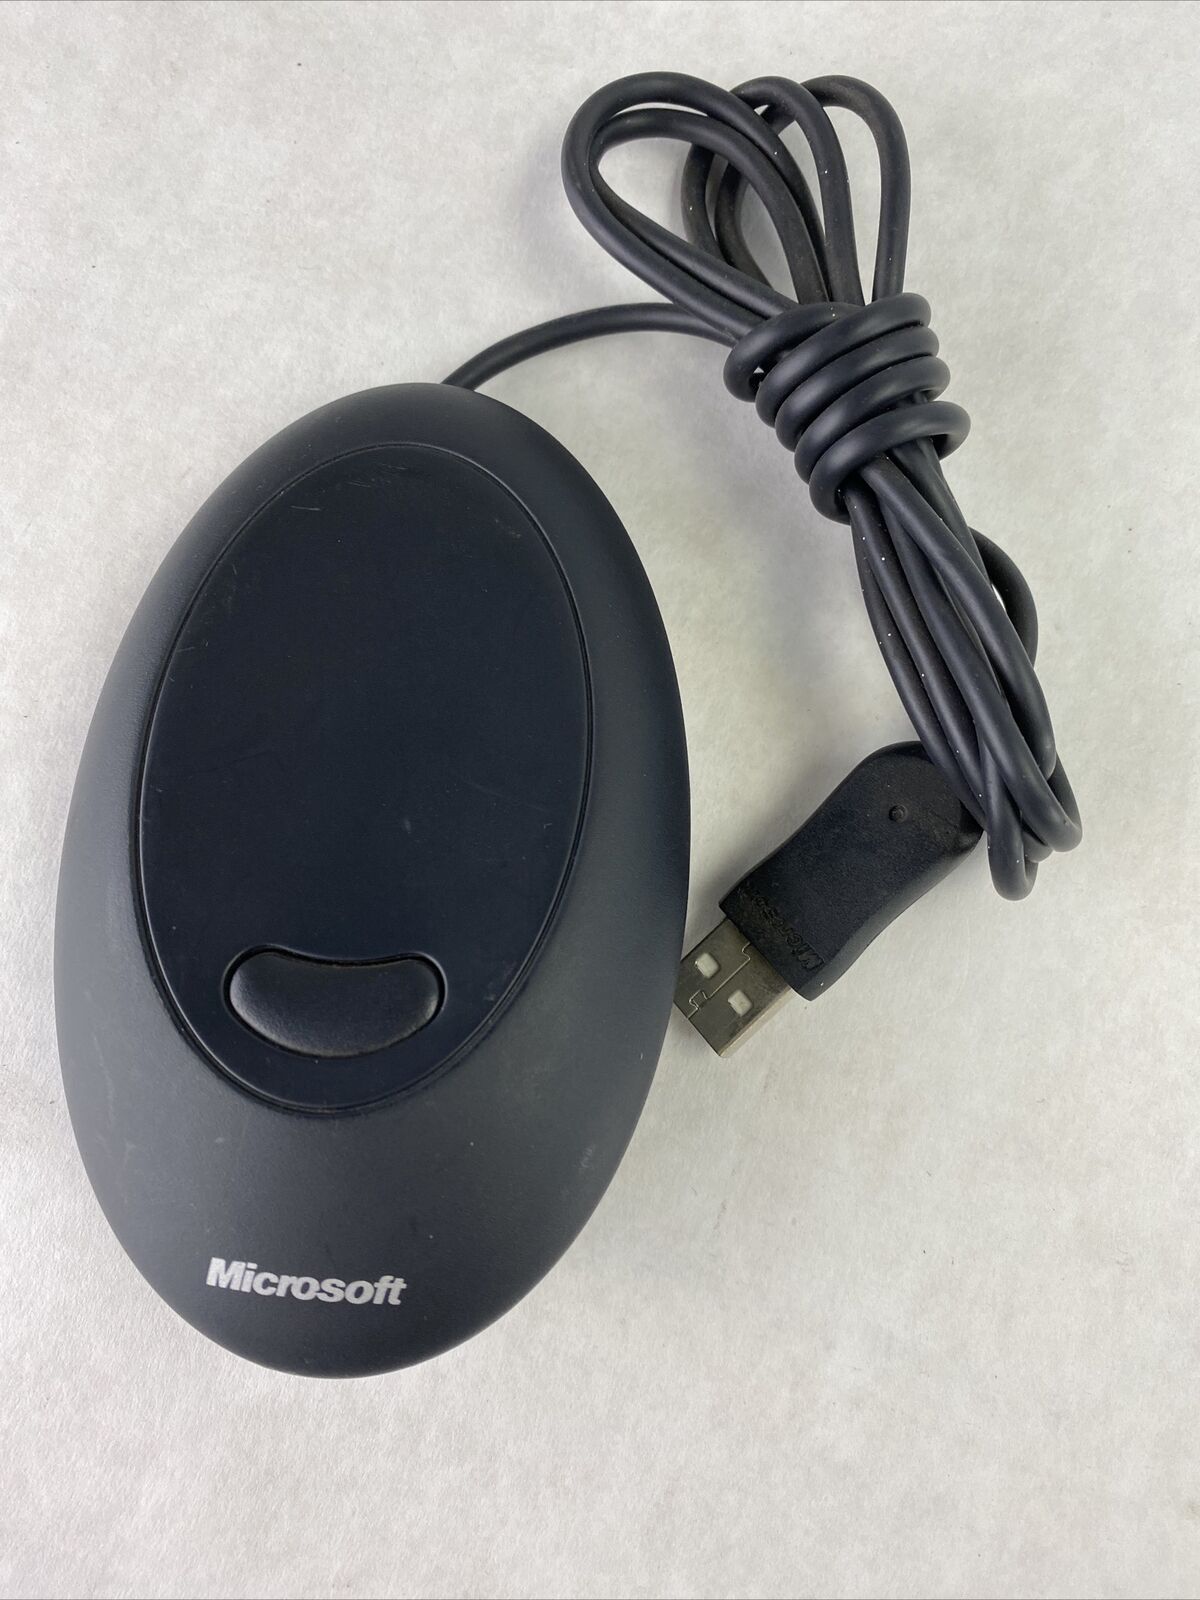 Microsoft 1053 X806941-001 USB Wireless Mouse Receiver 1.0 ONLY